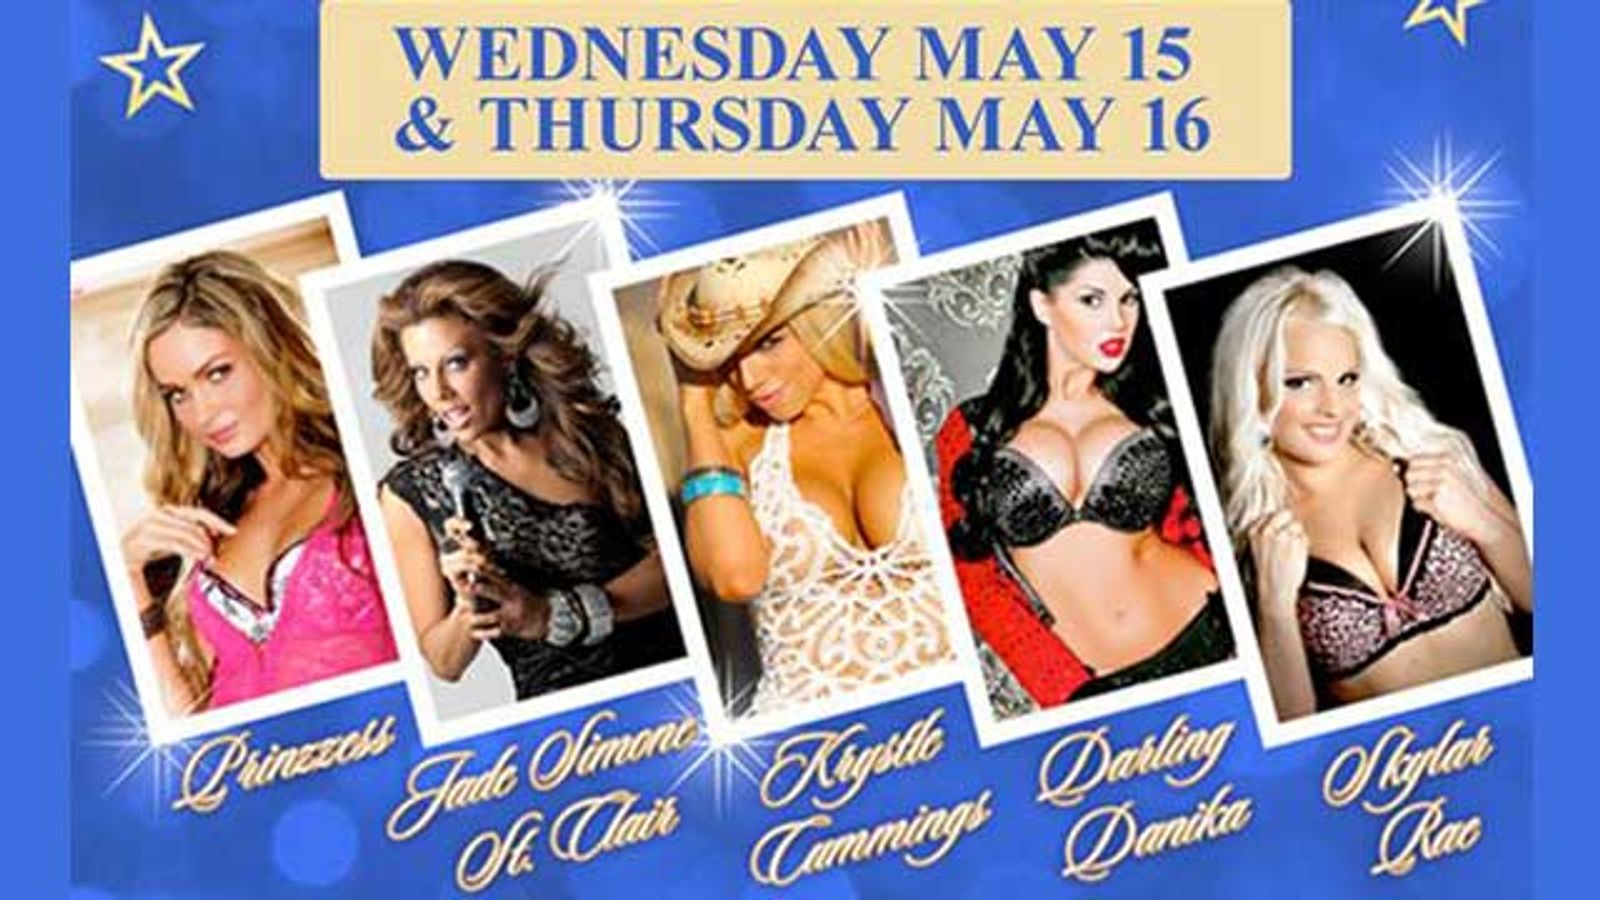 Prinzzess Felicity Jade Features at The Men’s Club in Raleigh, May 16-17